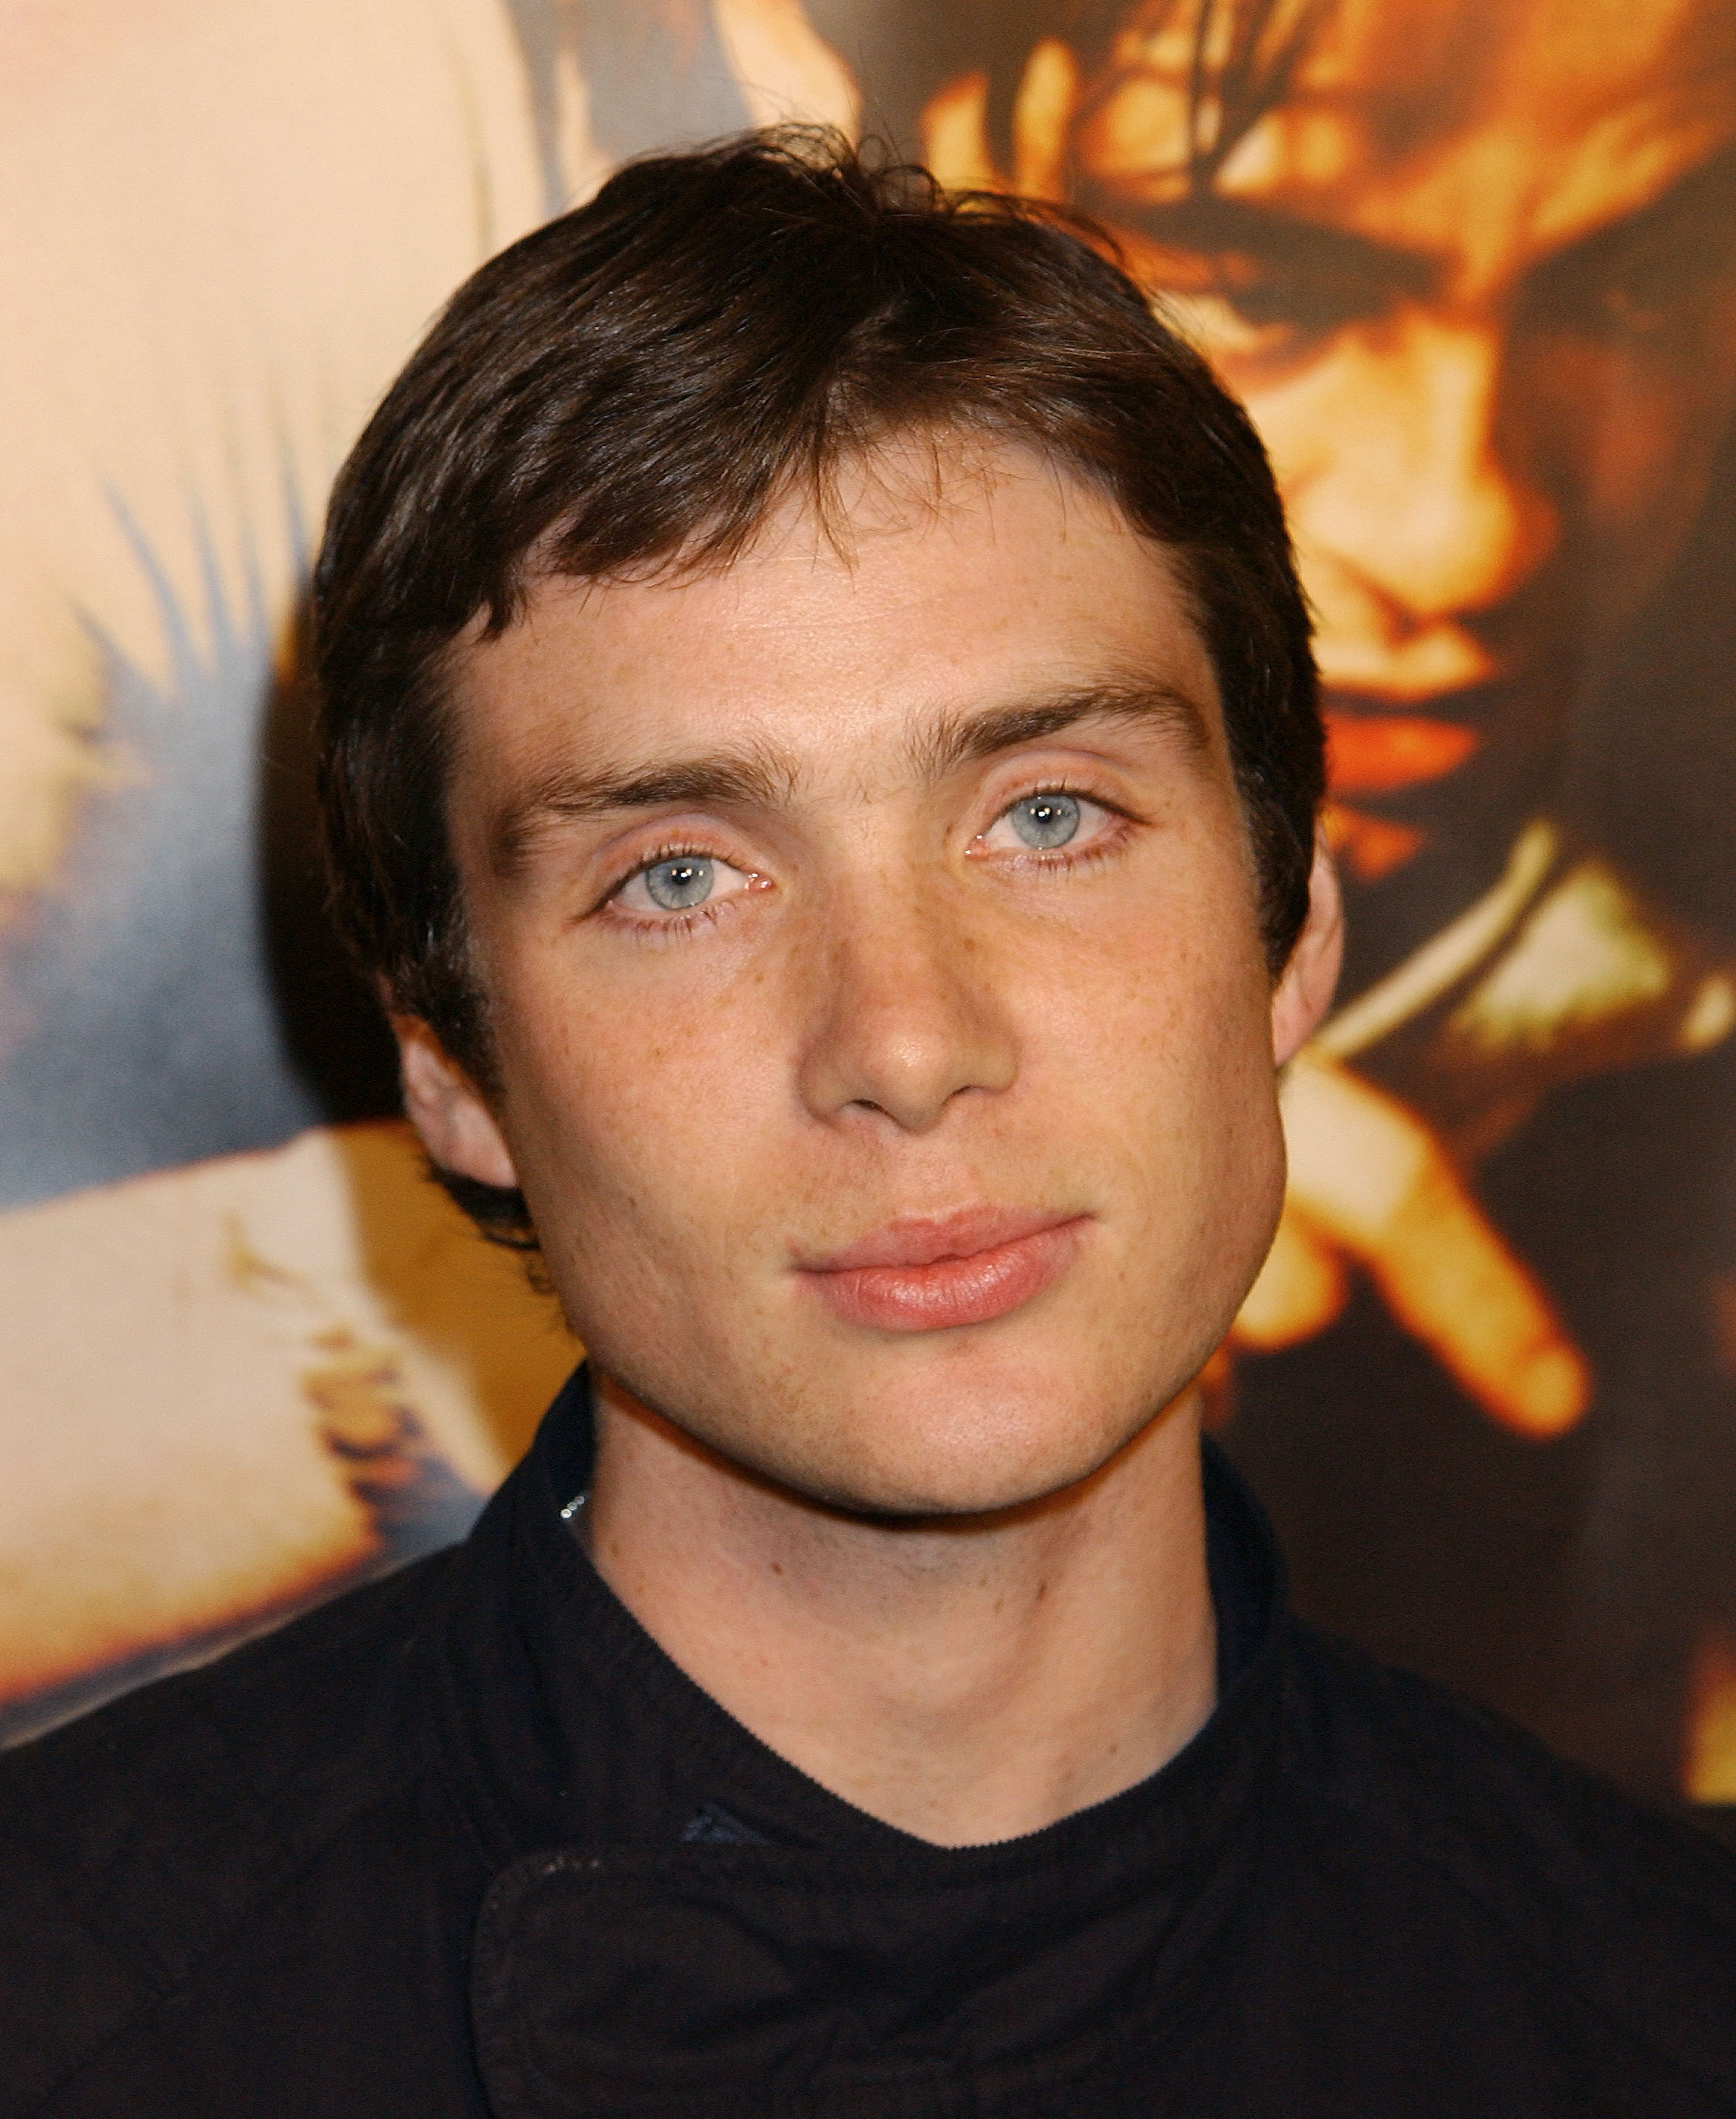 Cillian Murphy attends the "21 Grams" Los Angeles premiere on November 06, 2003 in Beverly Hills, California | Source: Getty Images